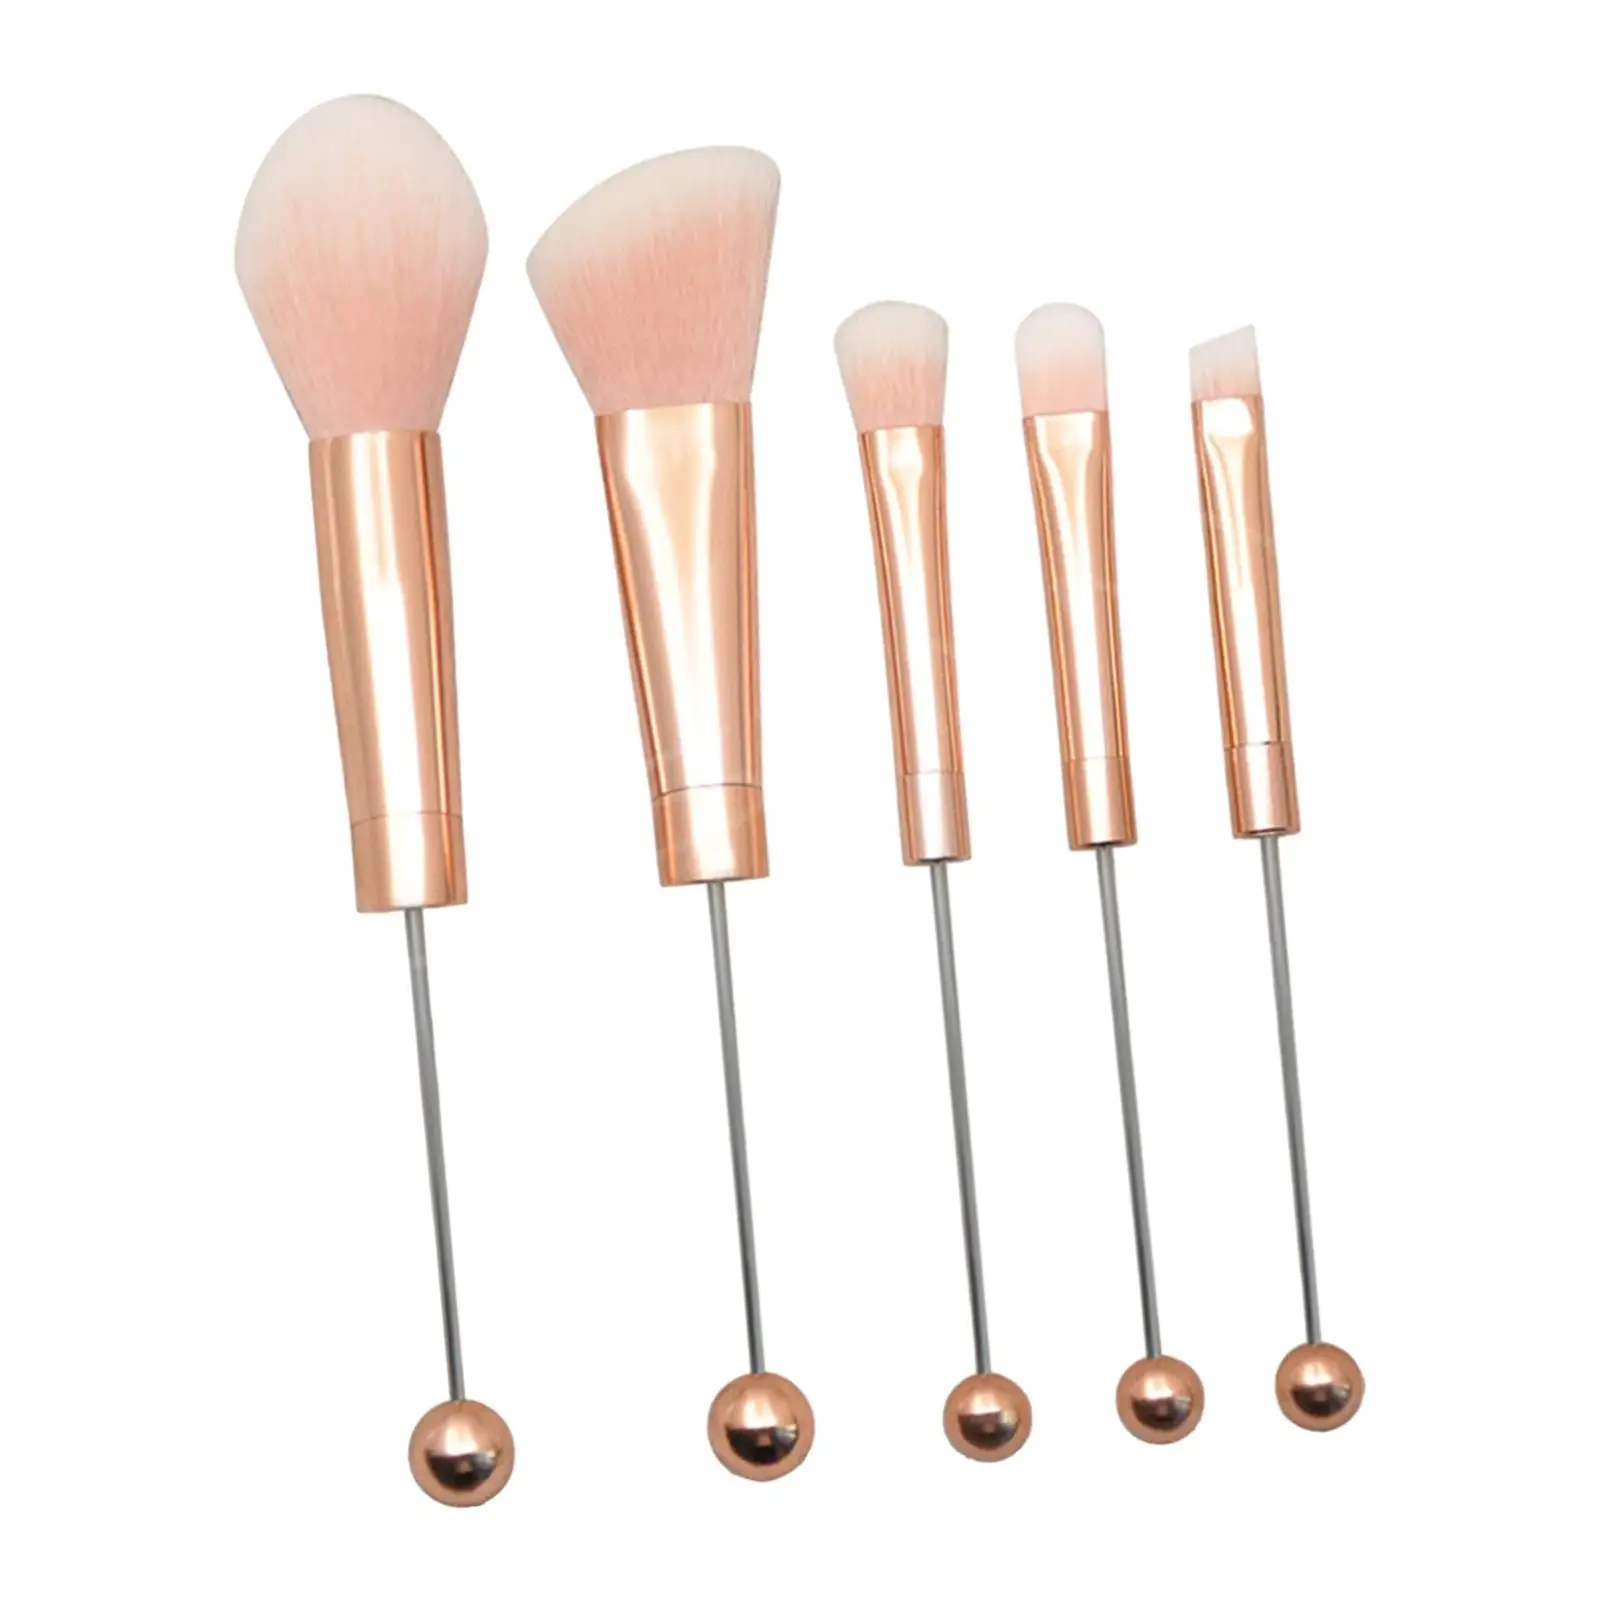 5x Eye Makeup Brush Set with Soft Synthetic Fiber Aluminum Tube Portable Professional for Bestie Adults Women Lady Holiday Gifts